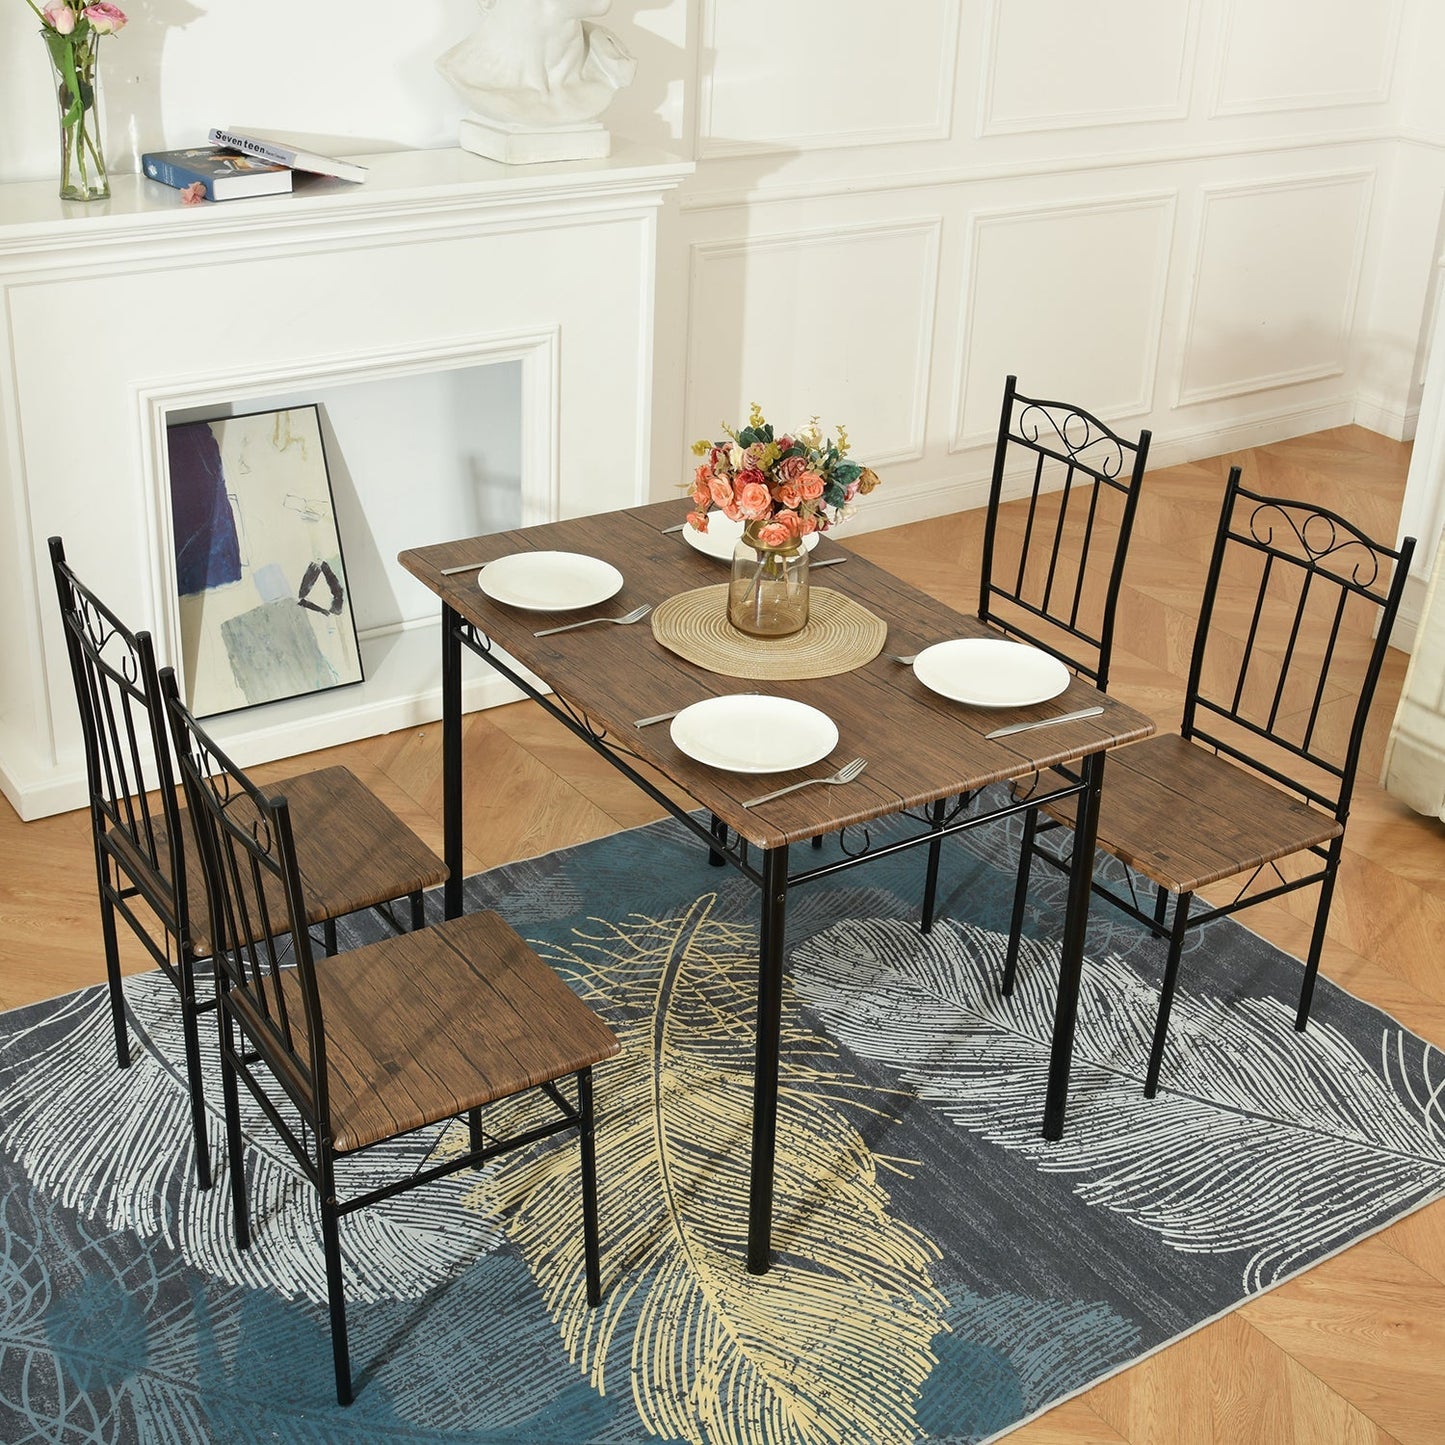 NORSEMAN 5 Piece Dining Set, Rectangular Dining Table with 4 Chairs 109*69*75cm - Colors Available